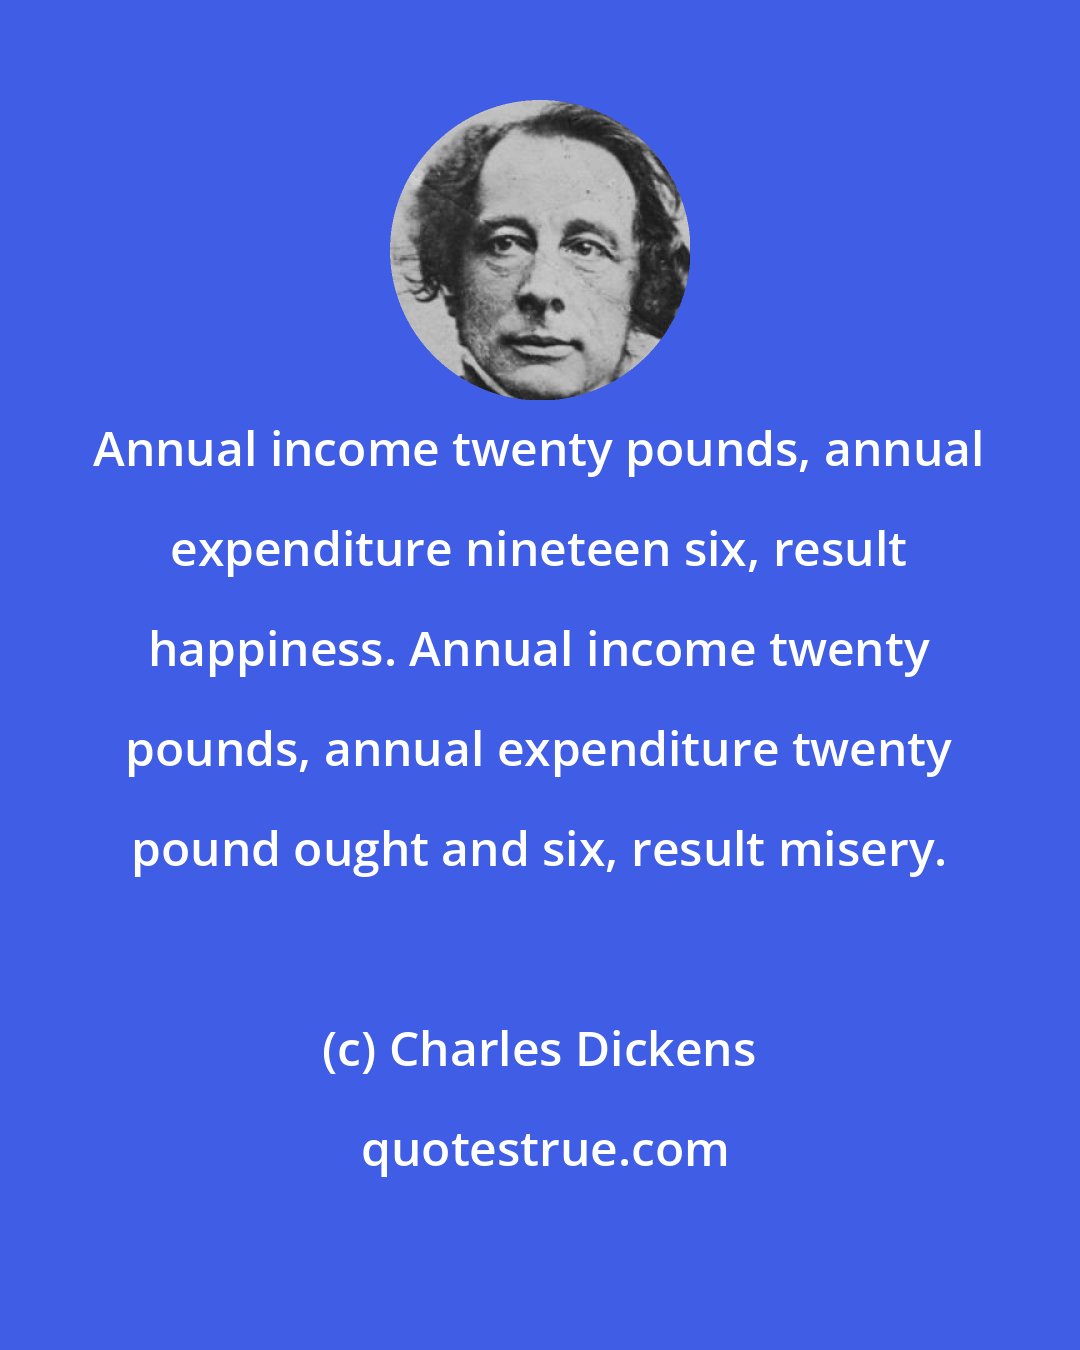 Charles Dickens: Annual income twenty pounds, annual expenditure nineteen six, result happiness. Annual income twenty pounds, annual expenditure twenty pound ought and six, result misery.